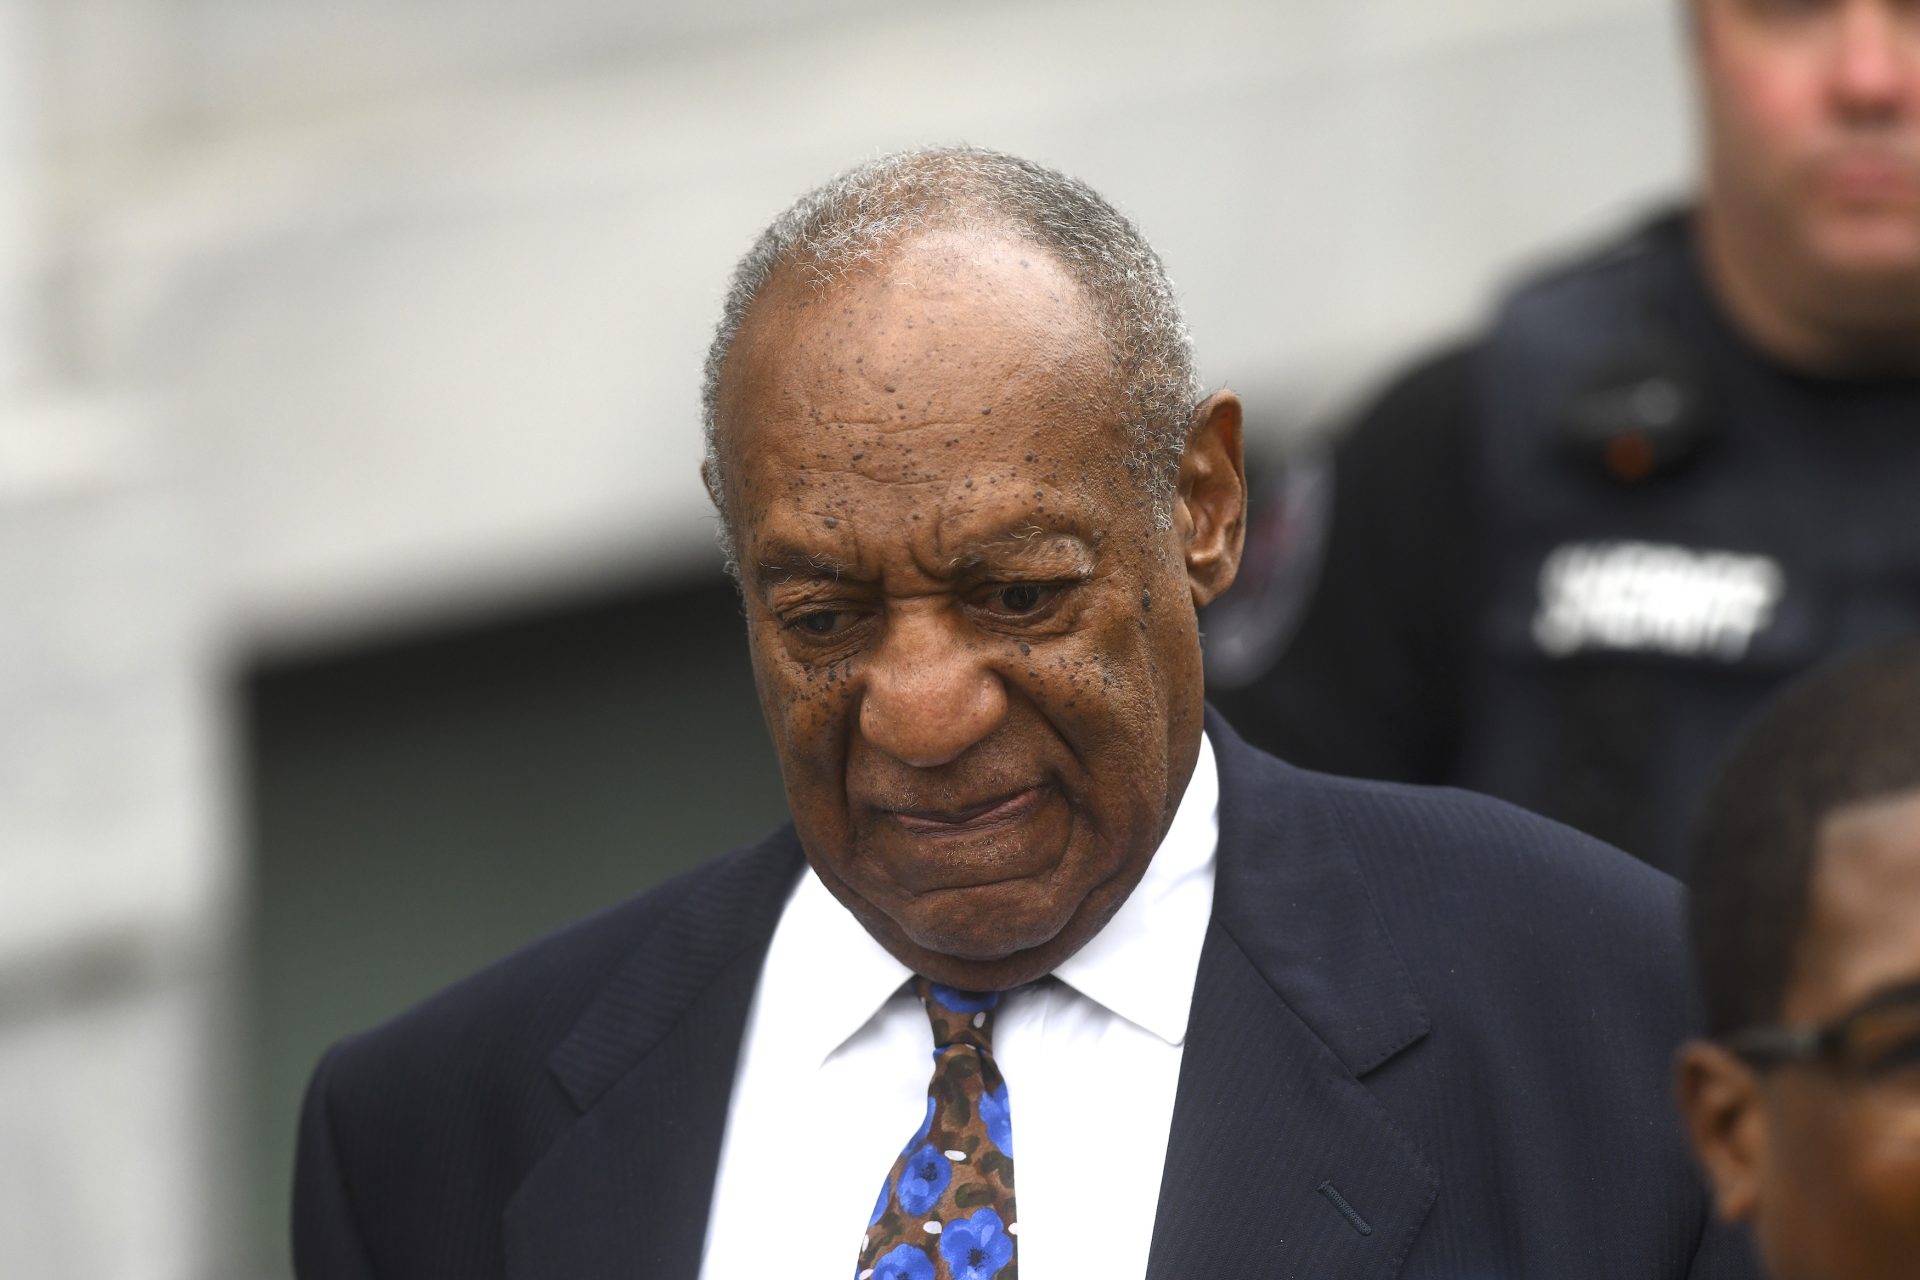 Jury Finds Bill Cosby Liable Of Sexual Battery But Rep Says Victim Will Never Get $500K Awarded In Damages